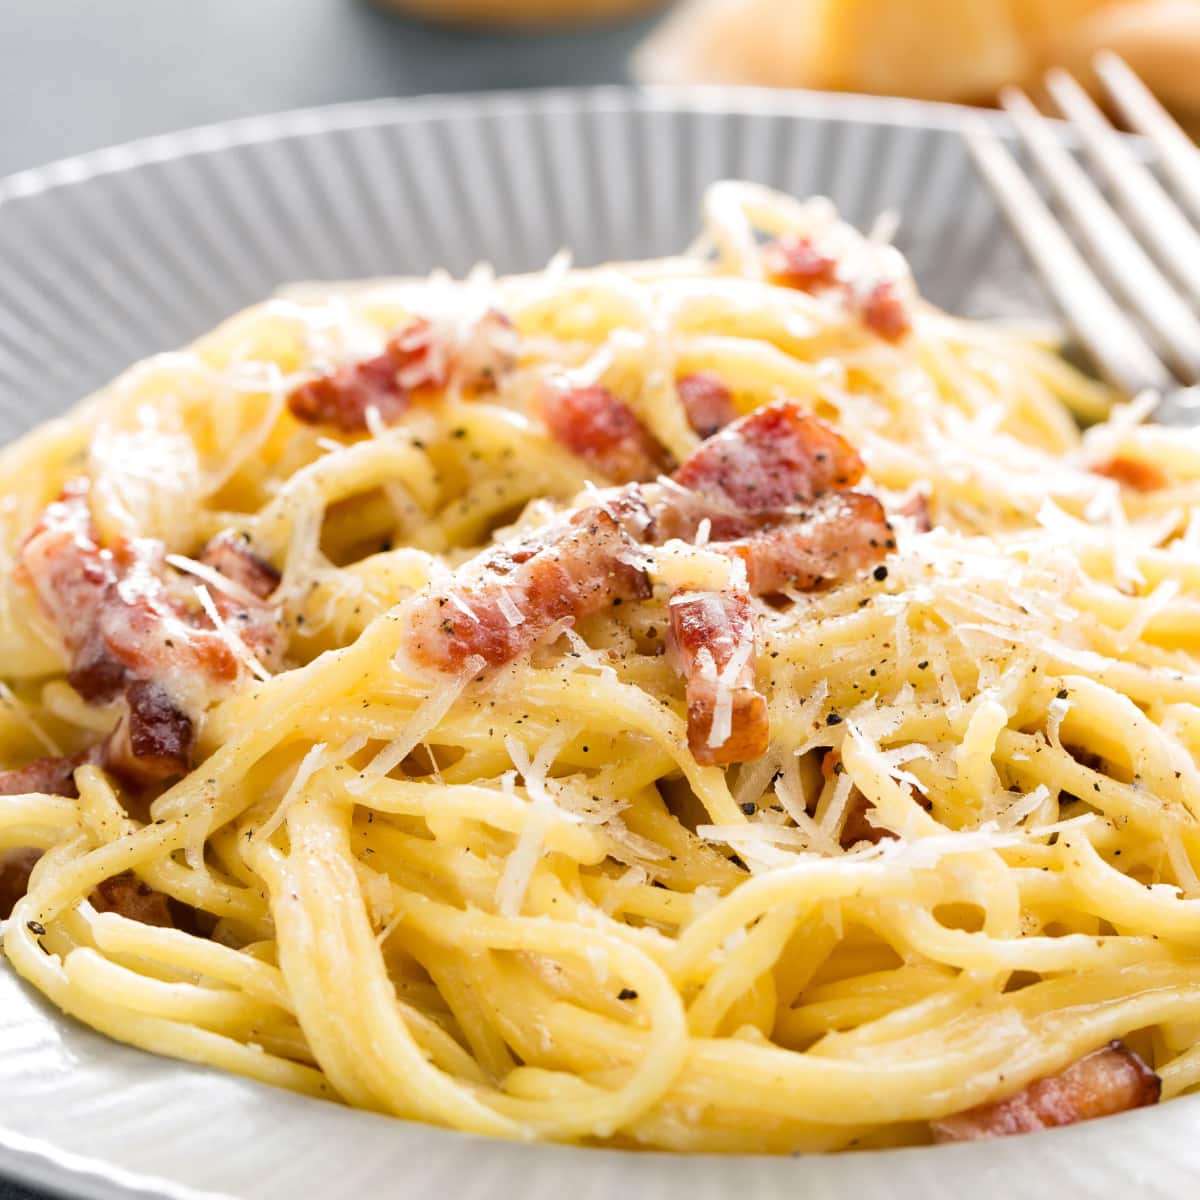 Pasta carbonara in a plate with cheese and bacon bits.